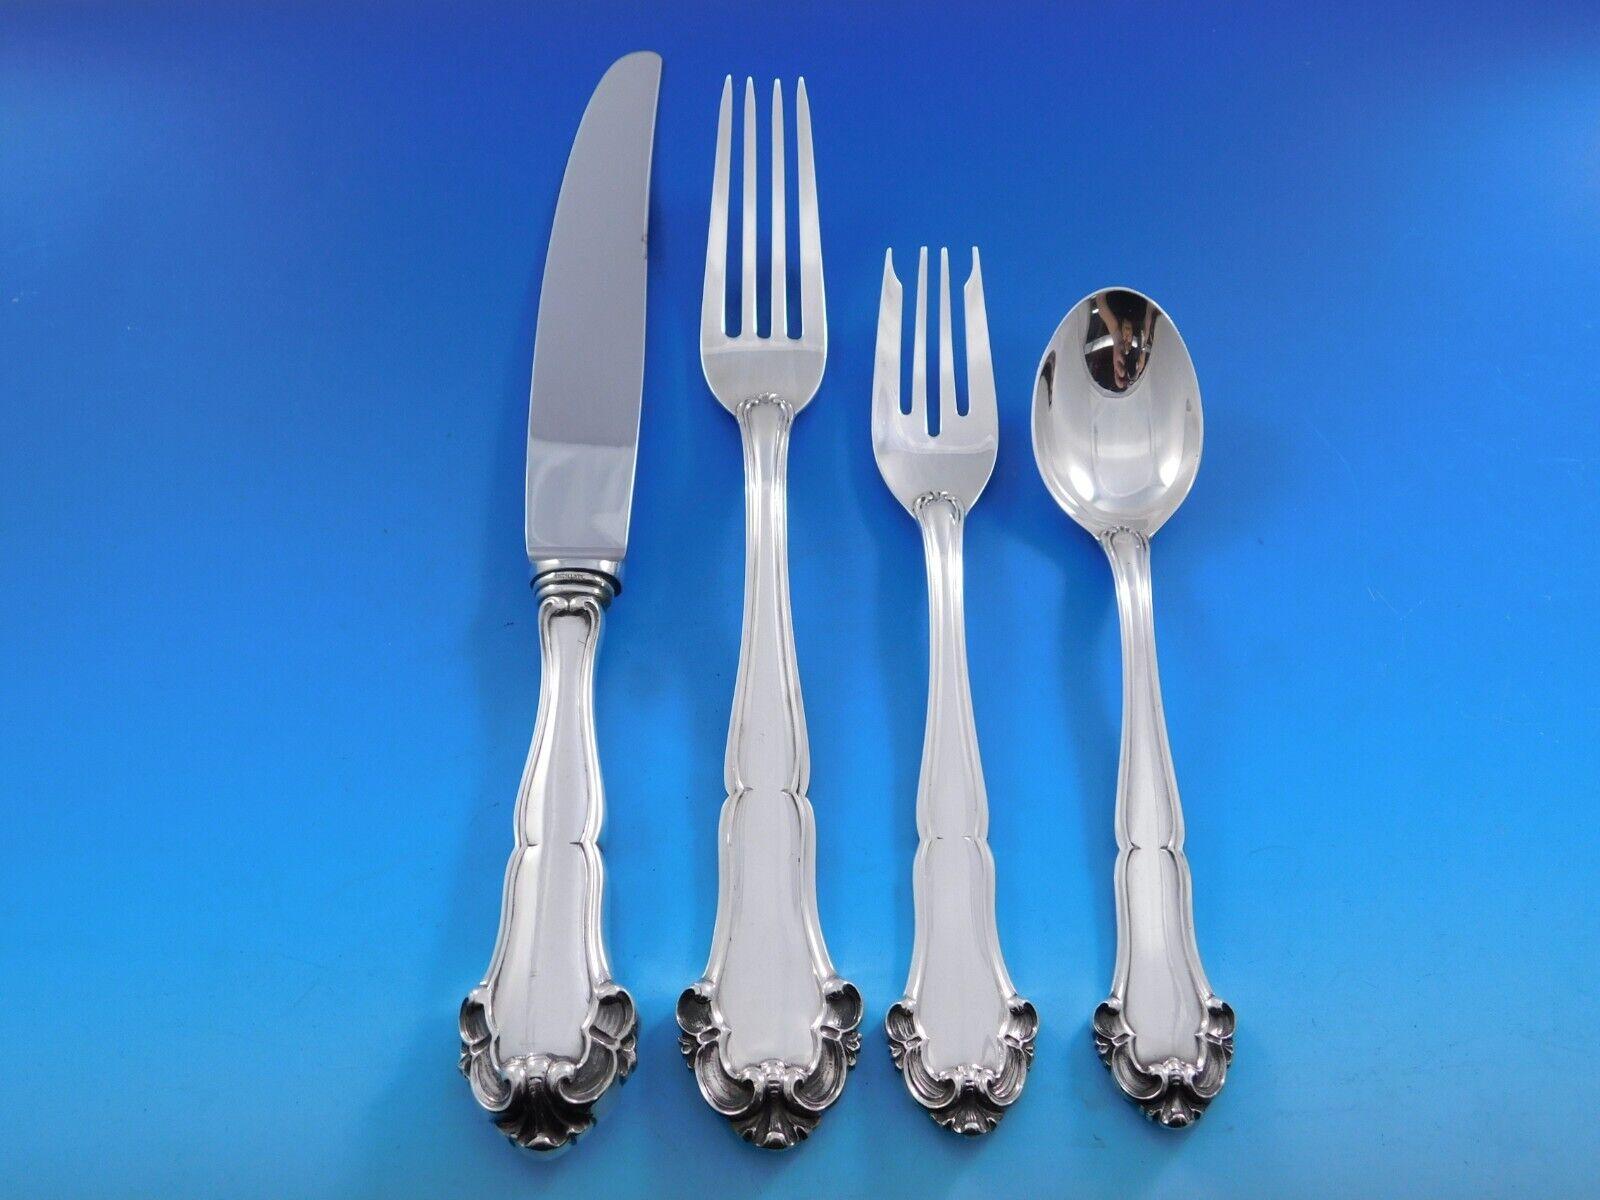 Grande Imperiale by Buccellati Italy Silver Flatware Set Service 48 pcs Dinner In Excellent Condition For Sale In Big Bend, WI